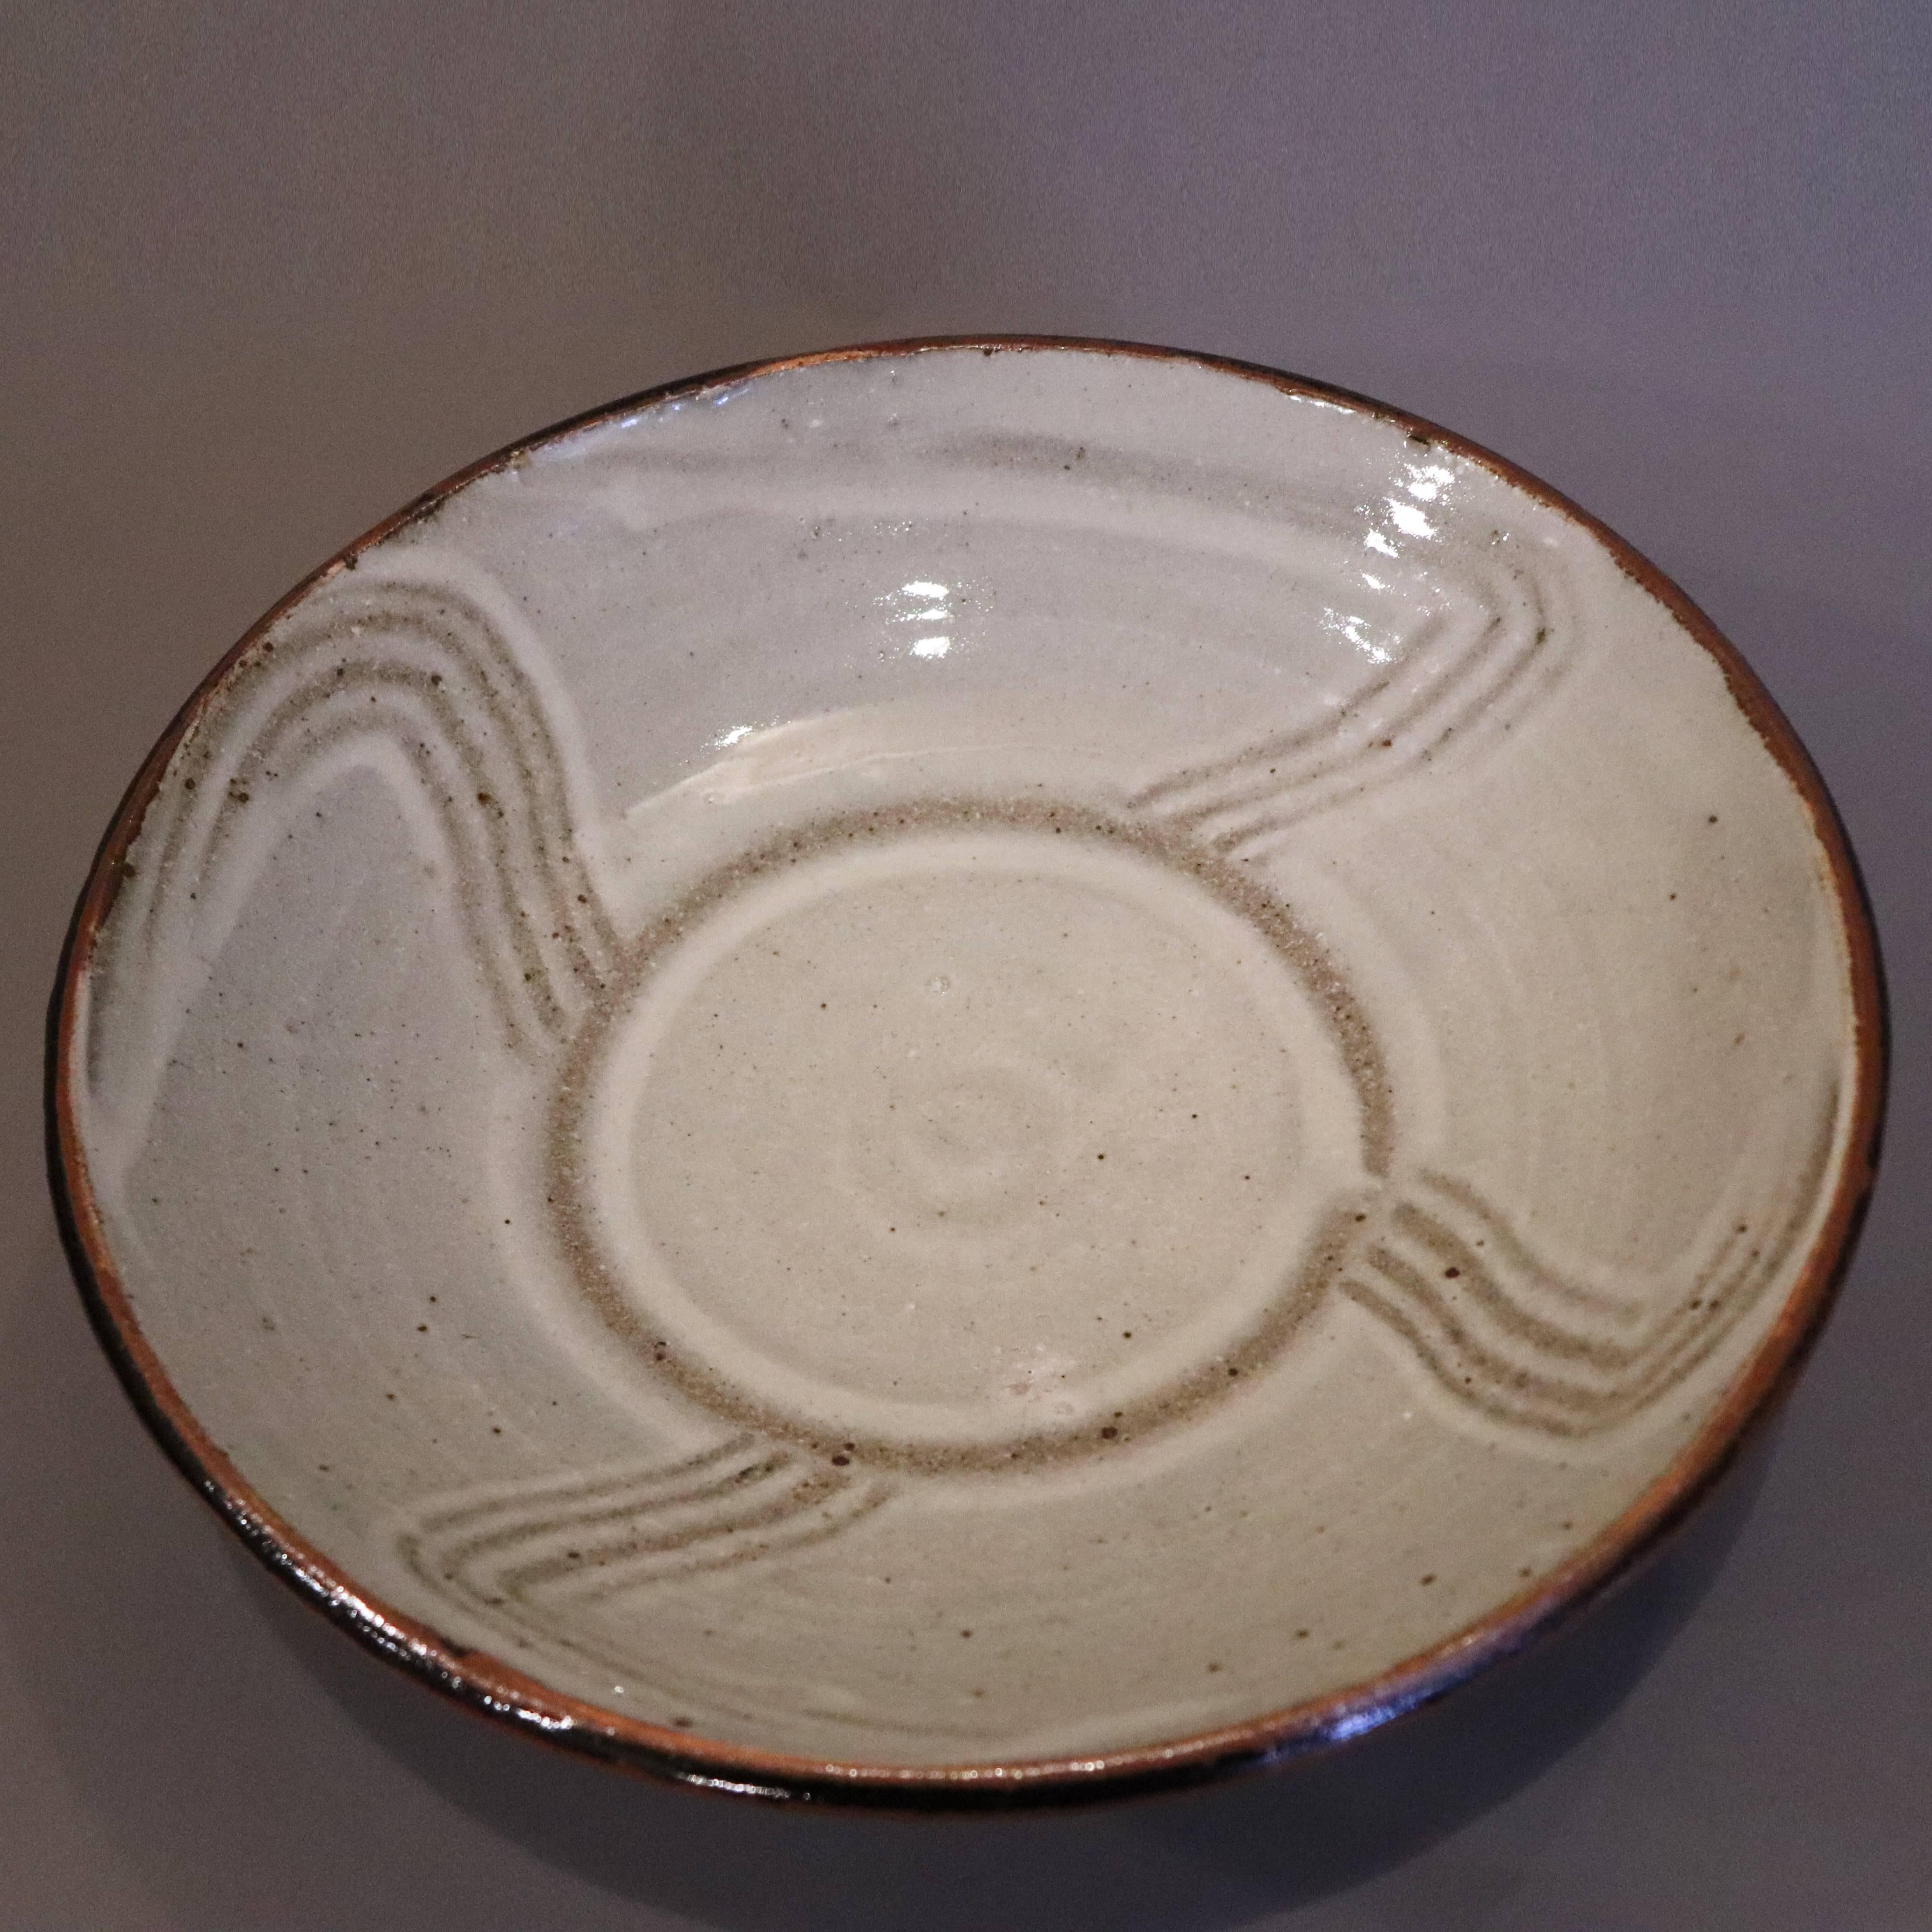 Handmade ceramic bowl of pot by Bernard Howell Leach, 

The Leach pottery is considered by many to be the birthplace of British Studio Pottery. One of the great figures of 20th century art, Bernard Leach played a crucial pioneering role in